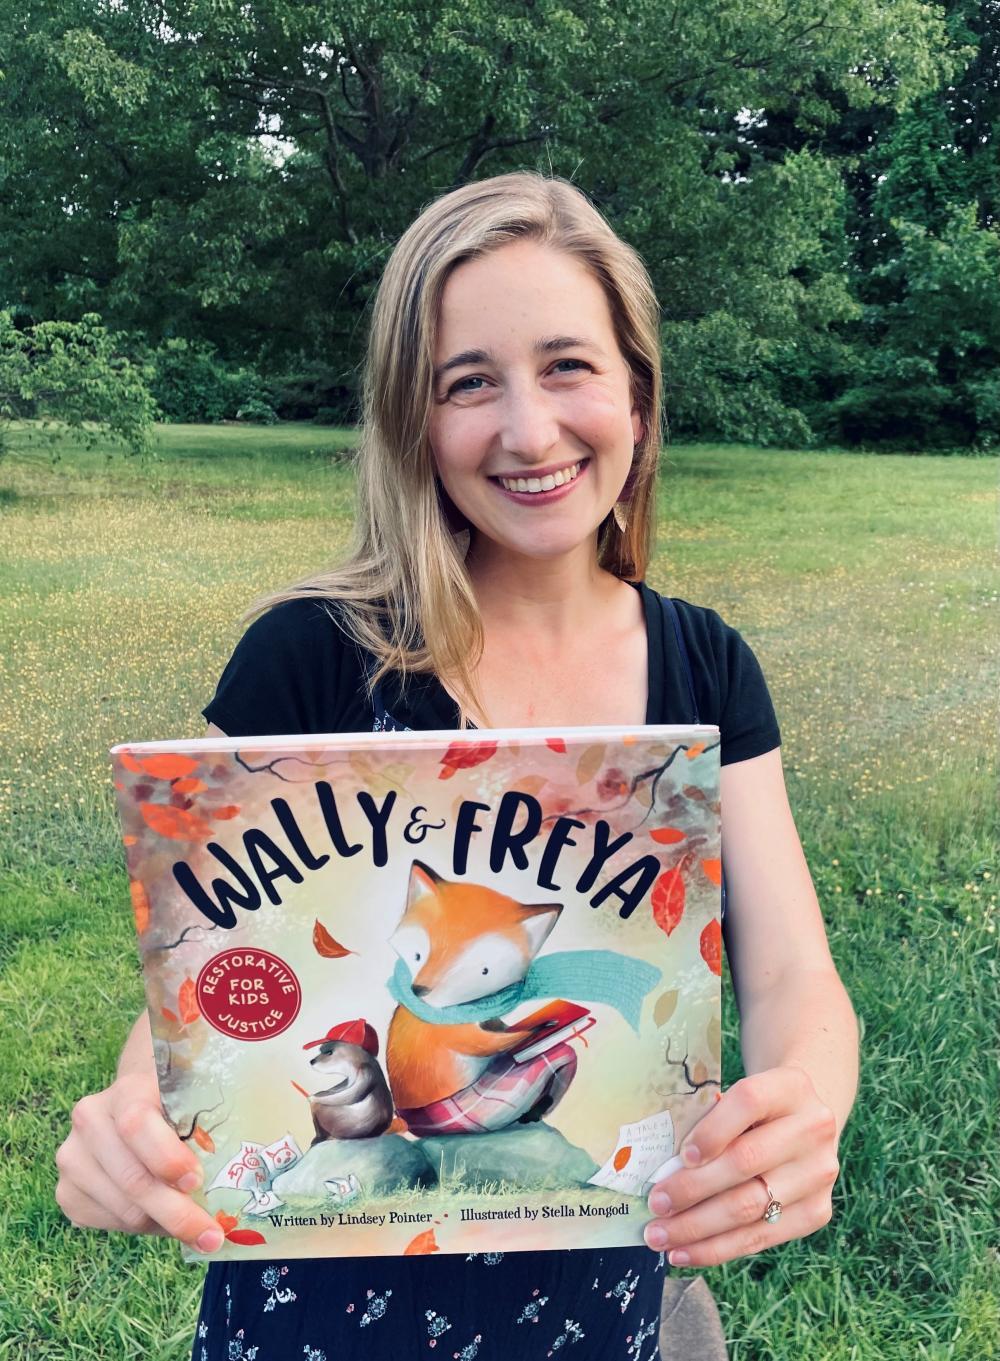 Lindsey Pointer with her book "Wally and Freya"